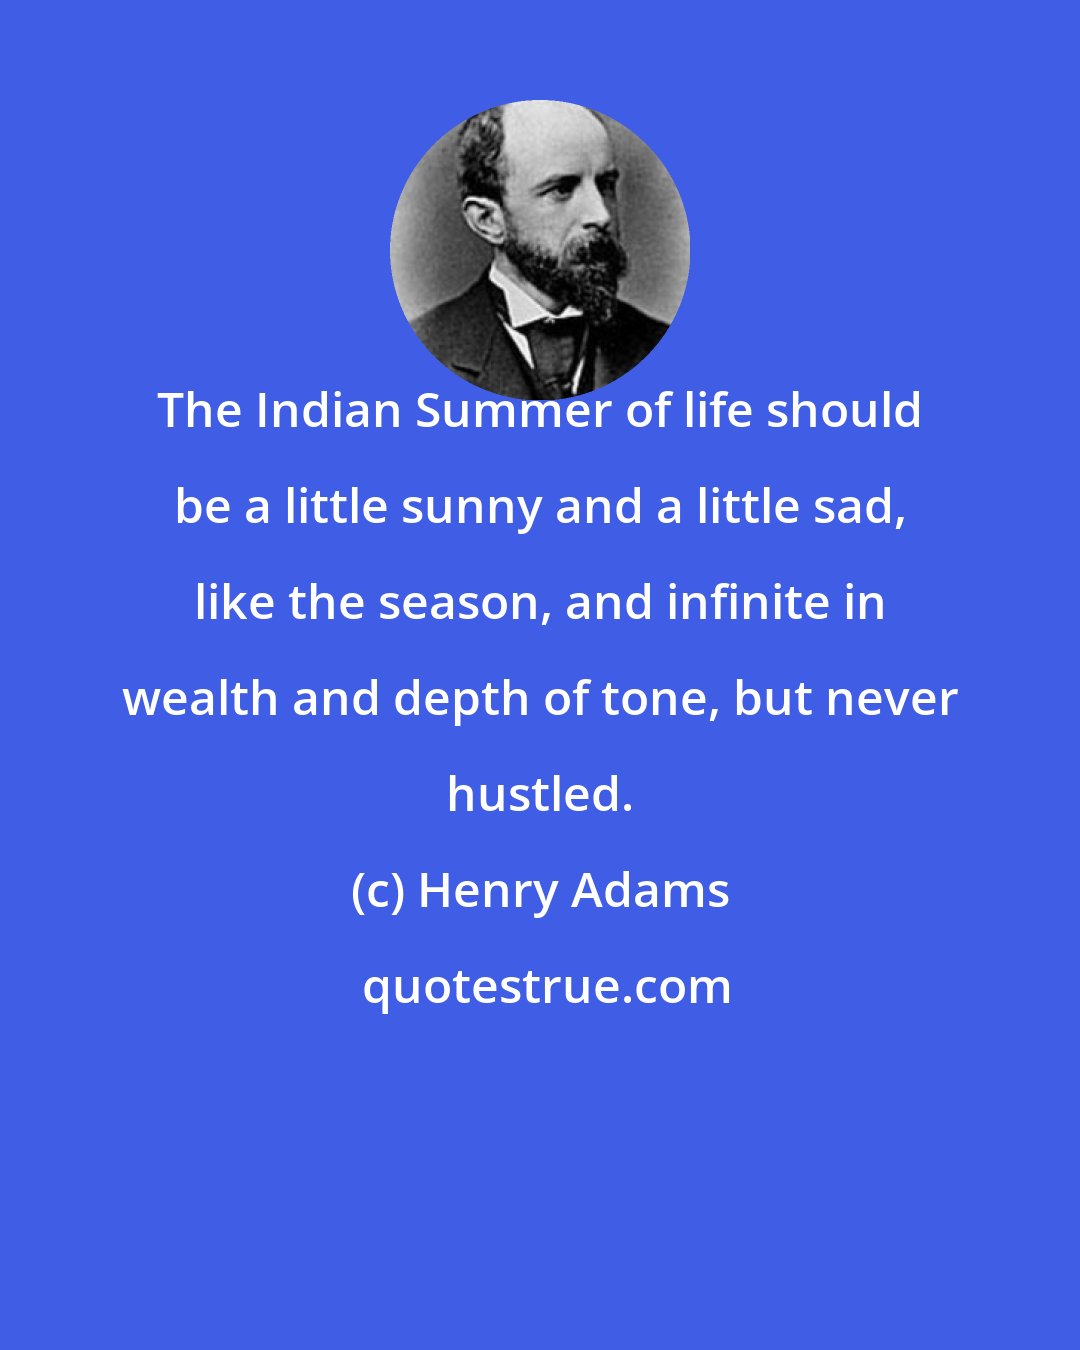 Henry Adams: The Indian Summer of life should be a little sunny and a little sad, like the season, and infinite in wealth and depth of tone, but never hustled.